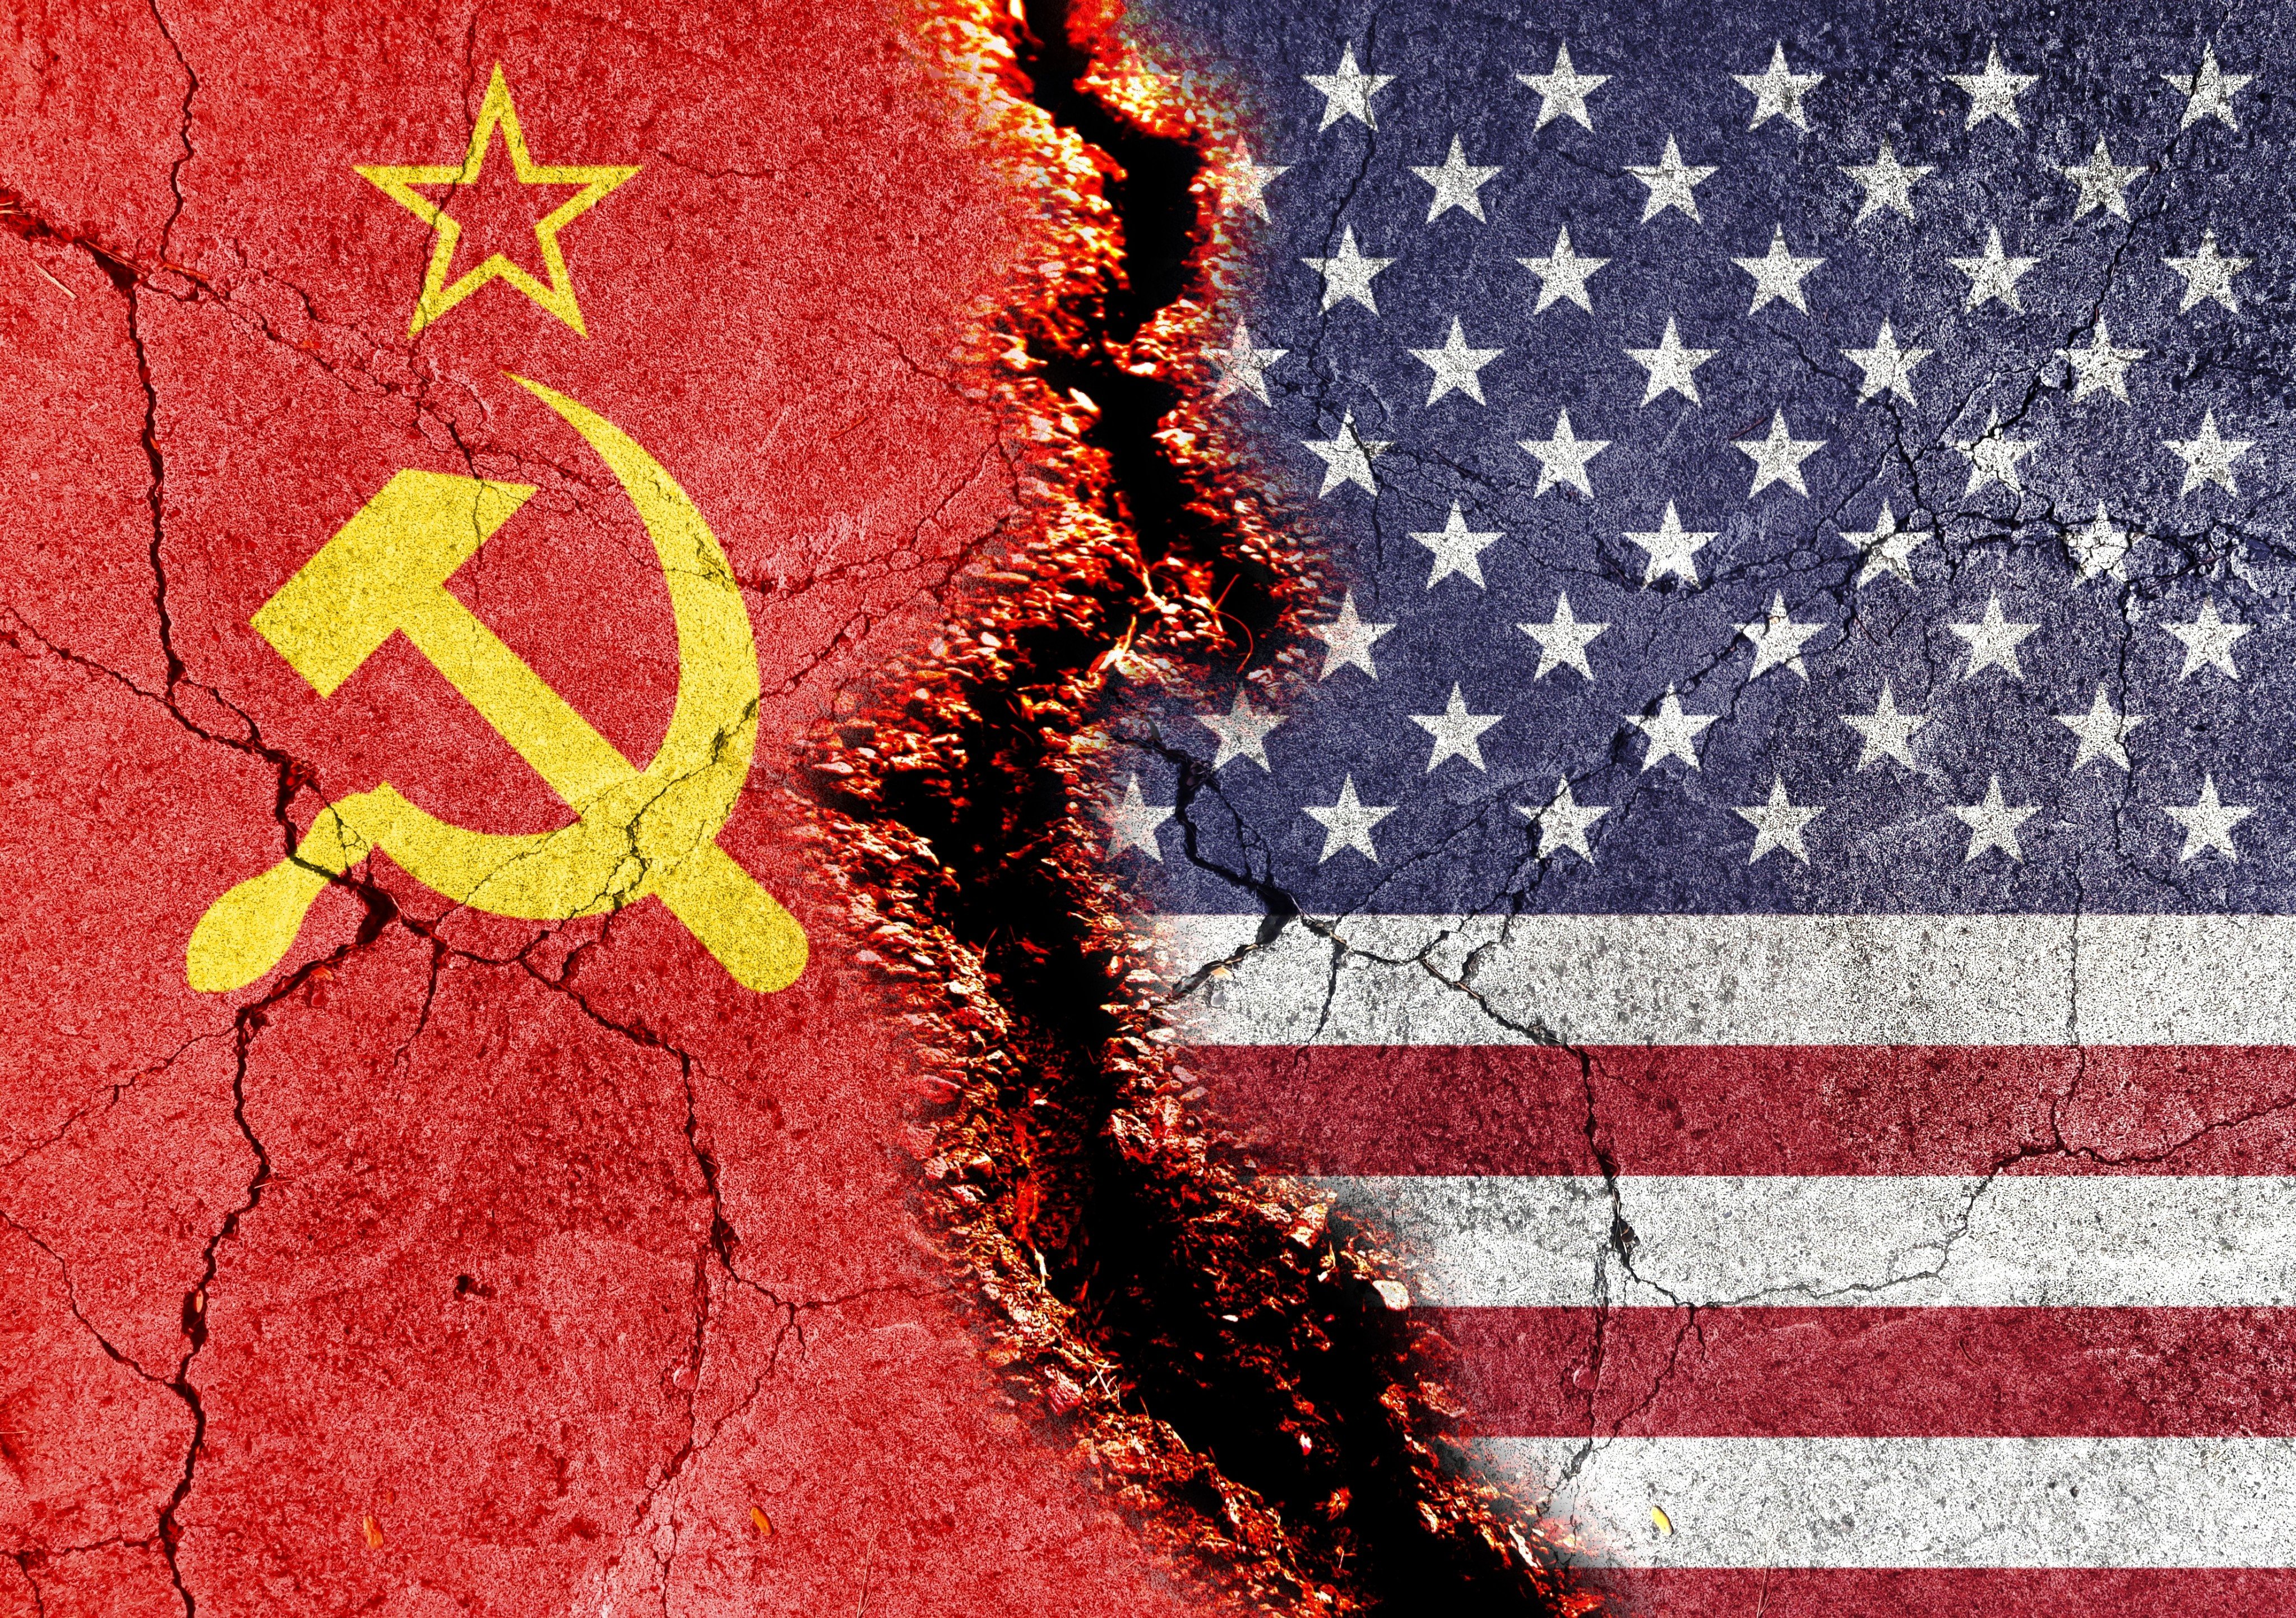 The world is increasingly being divided into pro-US and pro-China blocs, bringing back memories of the Cold War between the US and the Soviet Union which endured for nearly half a century. Photo: Shutterstock